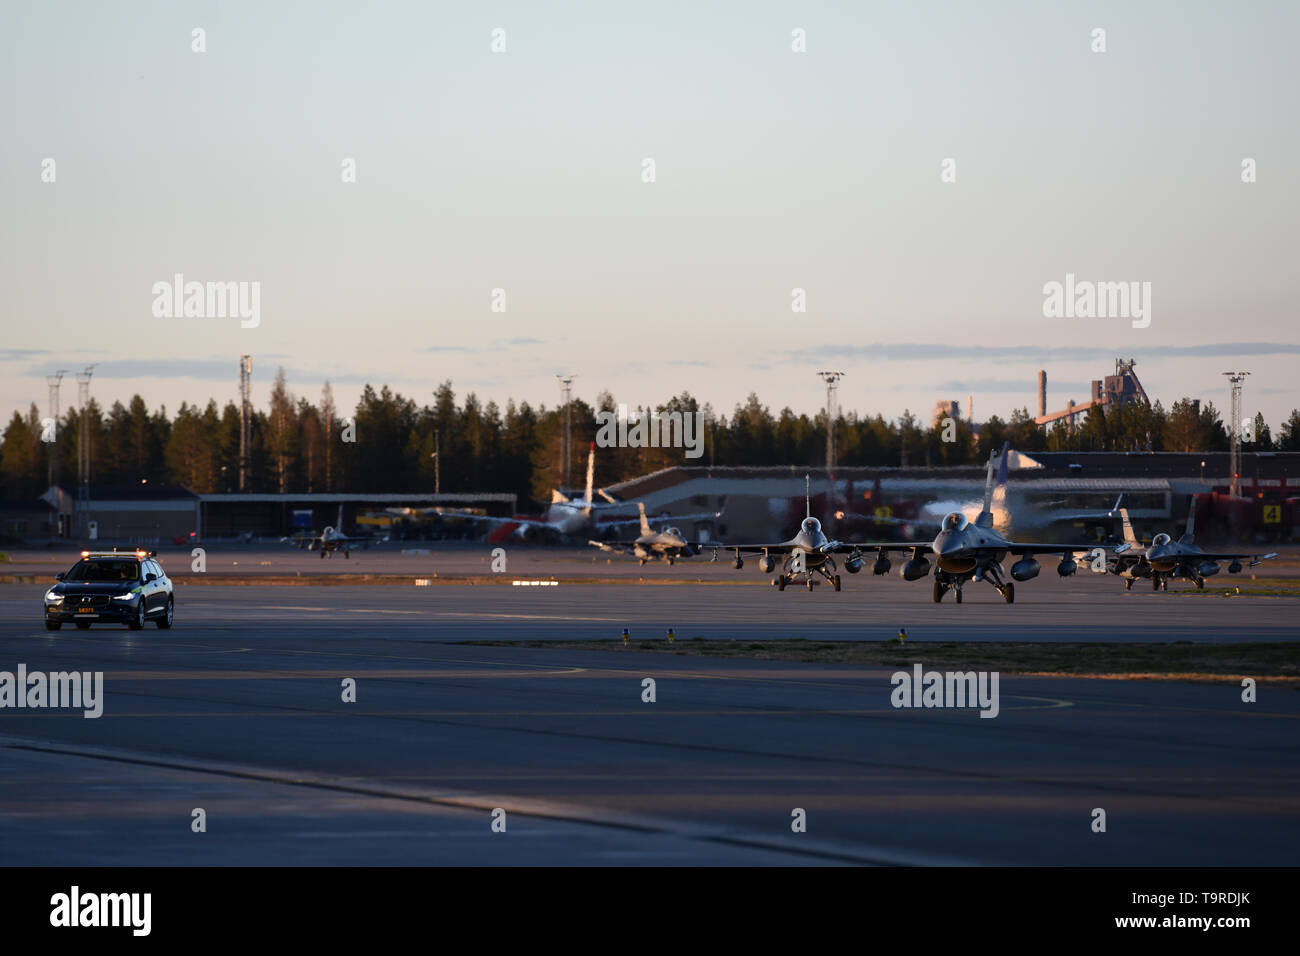 U.S. Air Force F-16C Block 52 Fighting Falcons assigned to the Air National Guard’s 169th Fighter Wing from McEntire Joint National Guard Base, S.C., arrive at Kallax Air Base, Luleå, Sweden, May 16, 2019 to participate in Arctic Challenge Exercise 2019. ACE19 is a Nordic aviation exercise, and this year will include participation from the Swedish, Norwegian, Danish, Finnish, French, German, Dutch, British, and U.S. forces. U.S. force’s participation, as part of the European Deterrence Initiative, demonstrates steadfast commitment to NATO allies and partners in Europe to remain resolute region Stock Photo